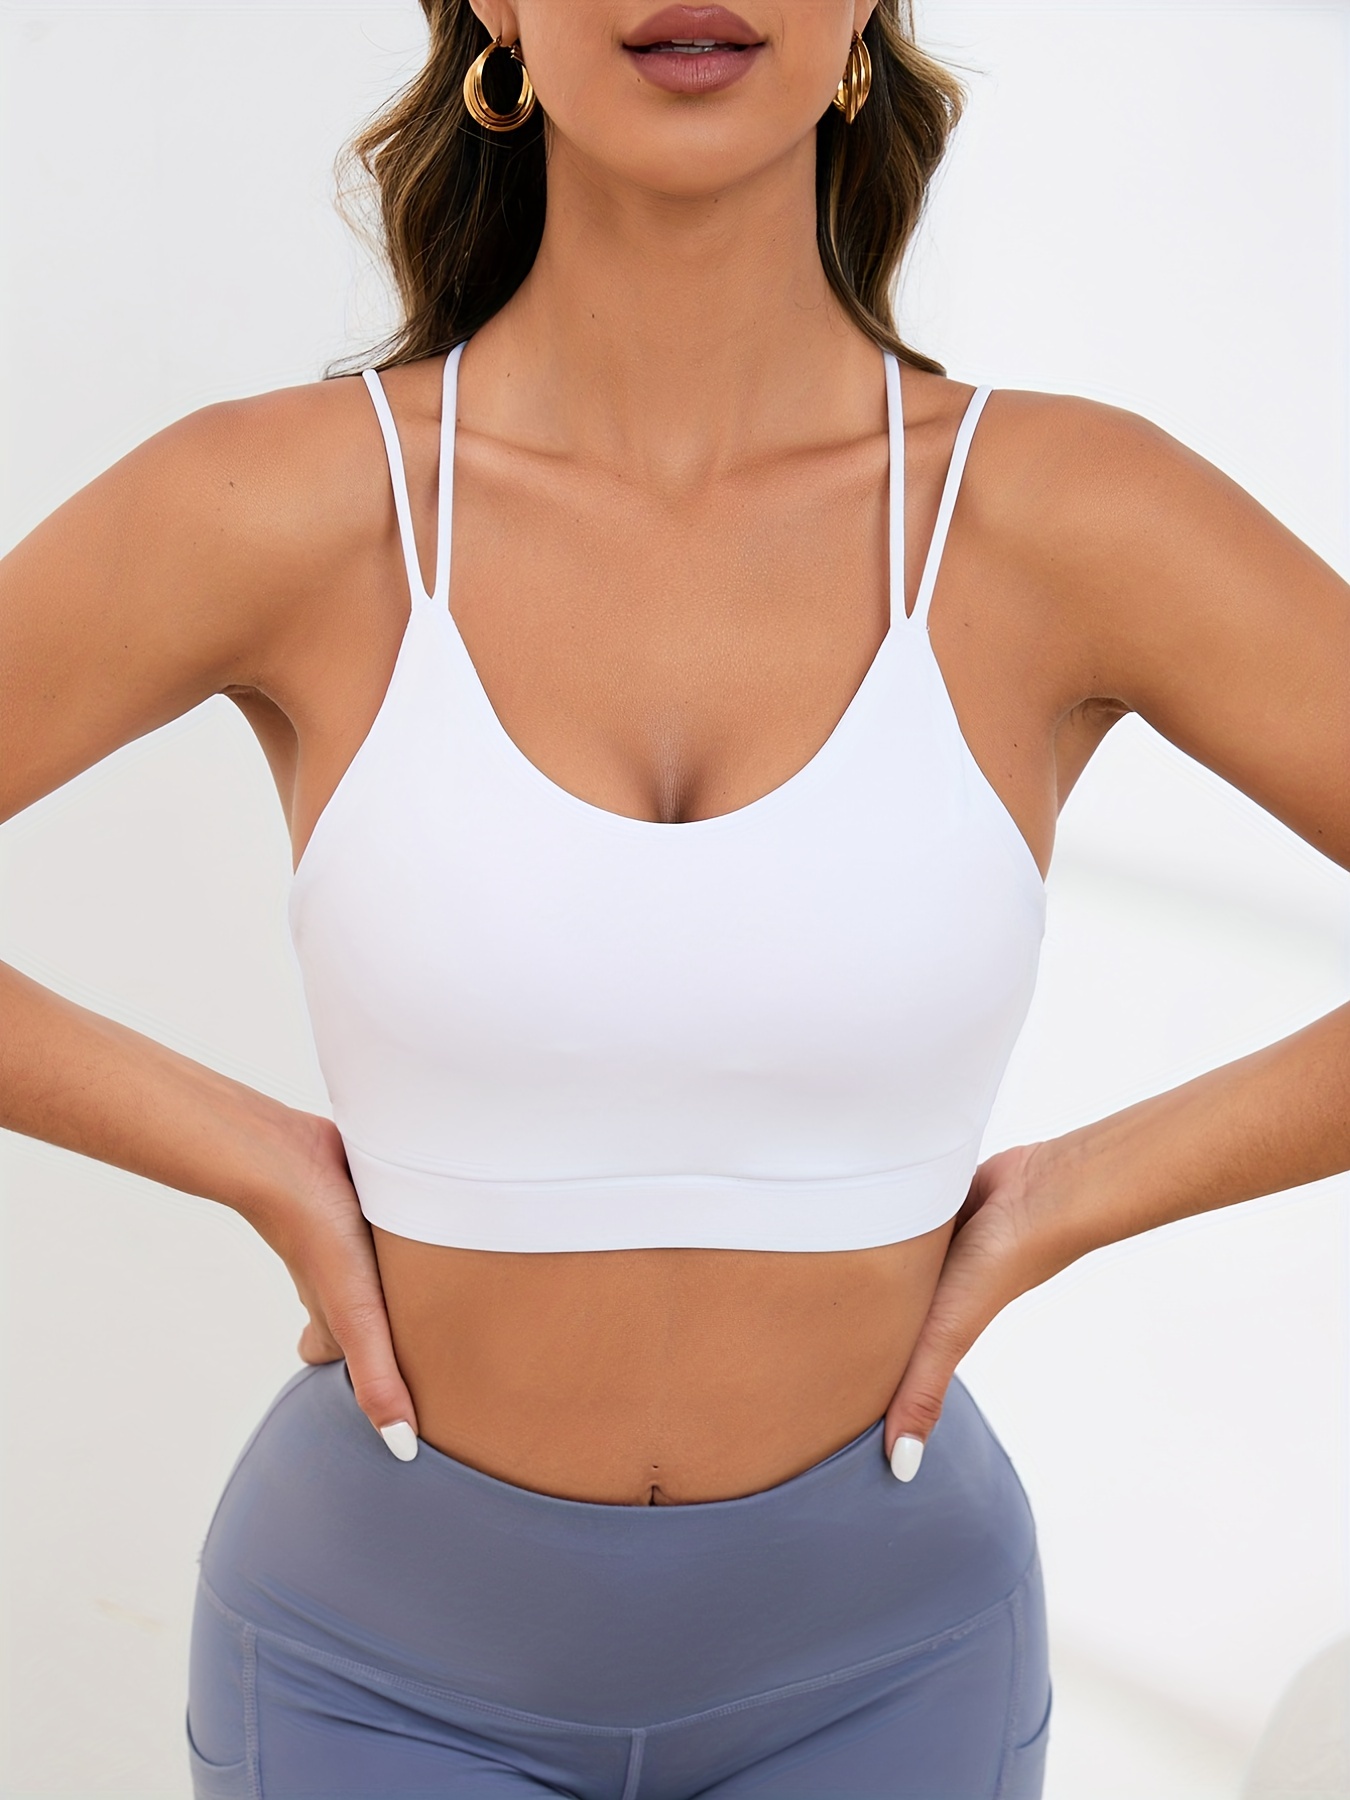 Square Neck Backless Spaghetti Straps Sports Bras for Women Padded